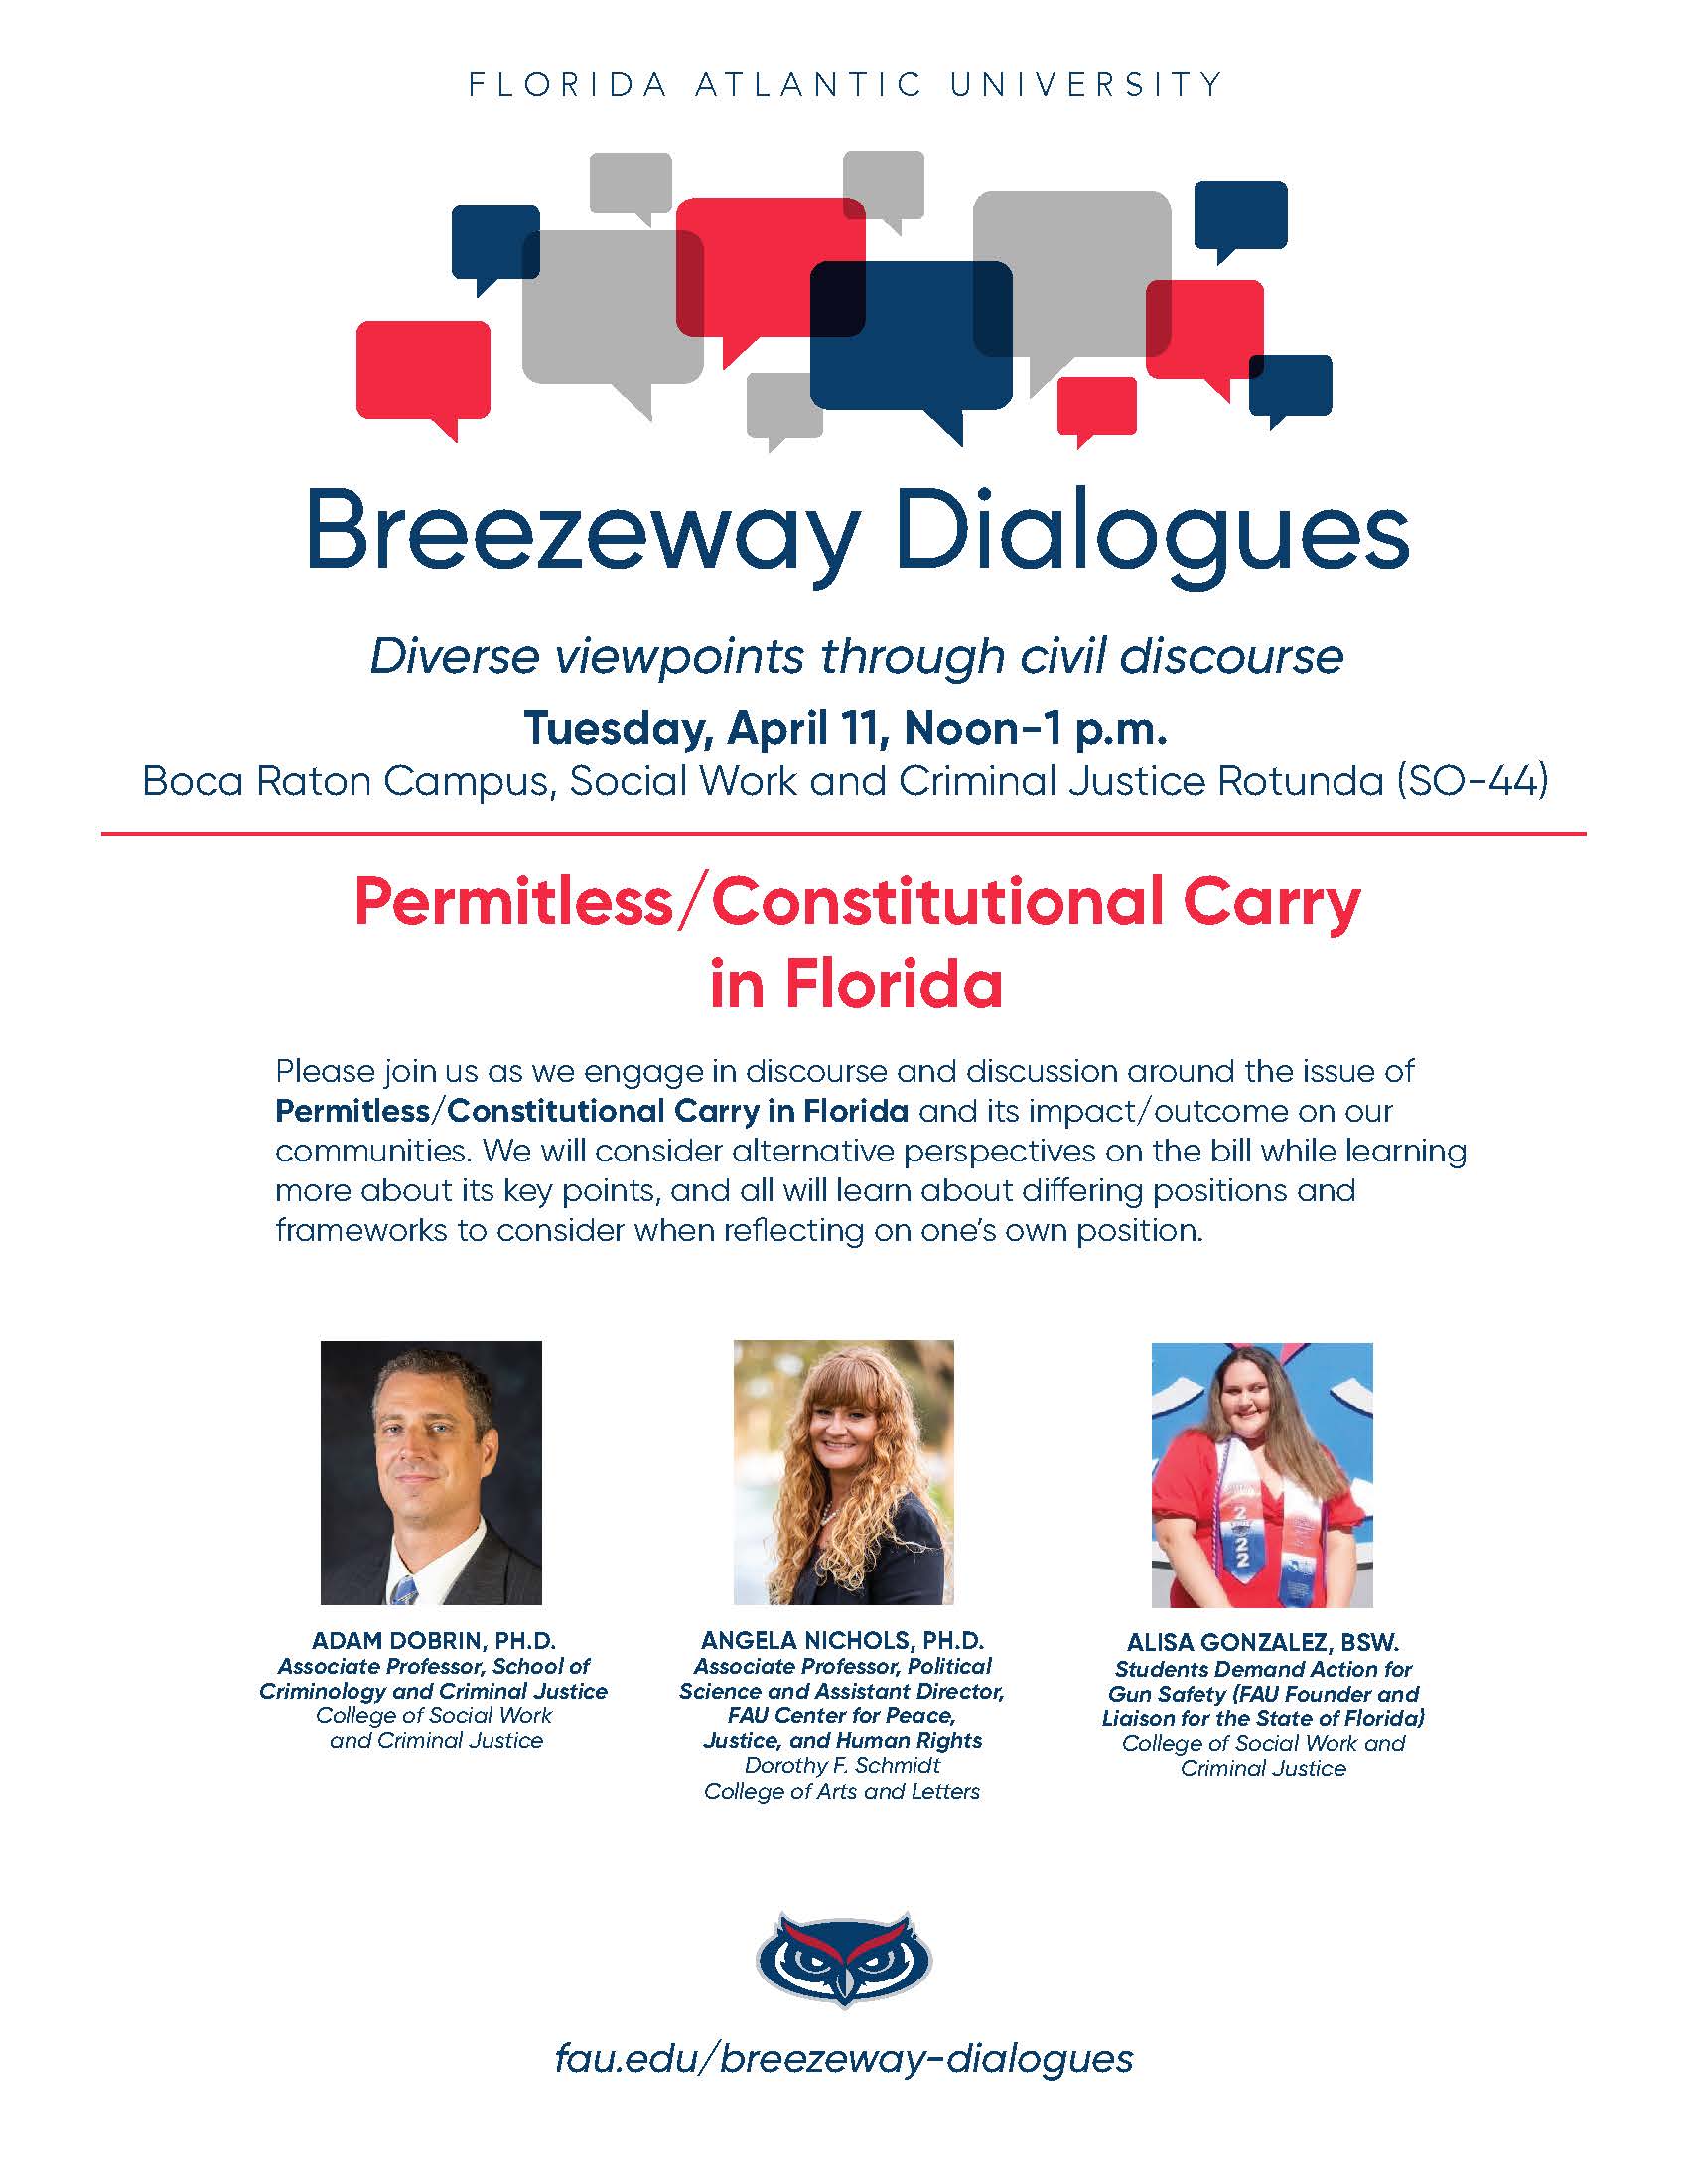 Permitless/Constitutional Carry in Florida